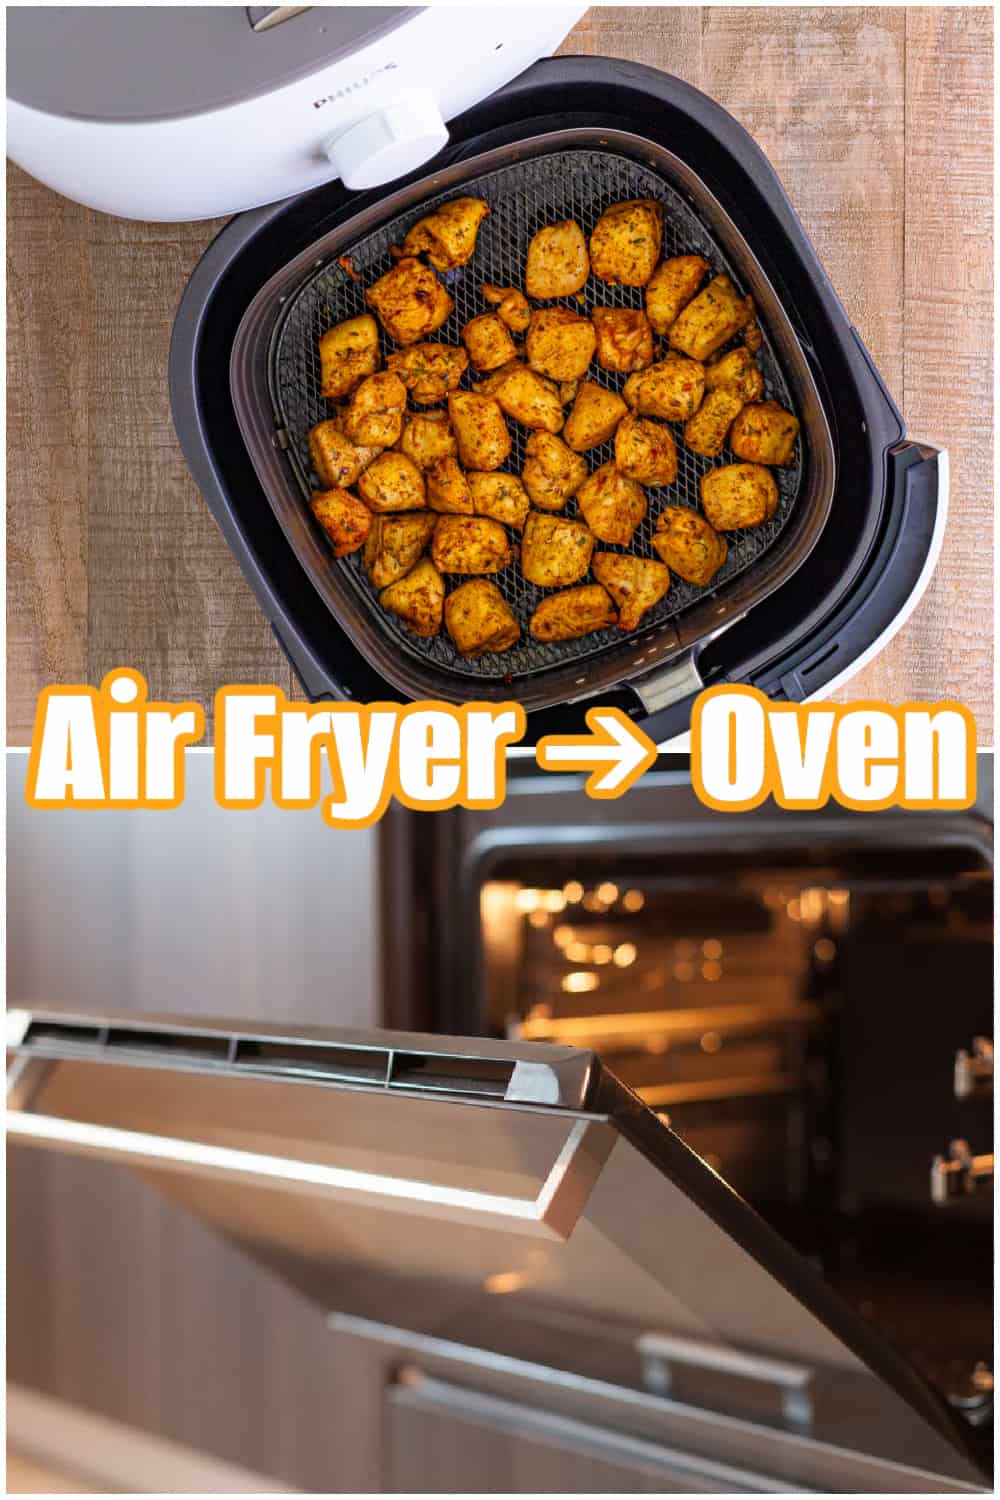 A collage with the top photo showing an open air fryer with pieces of chicken in it and the bottom photo showing an oven with the door slightly ajar. 